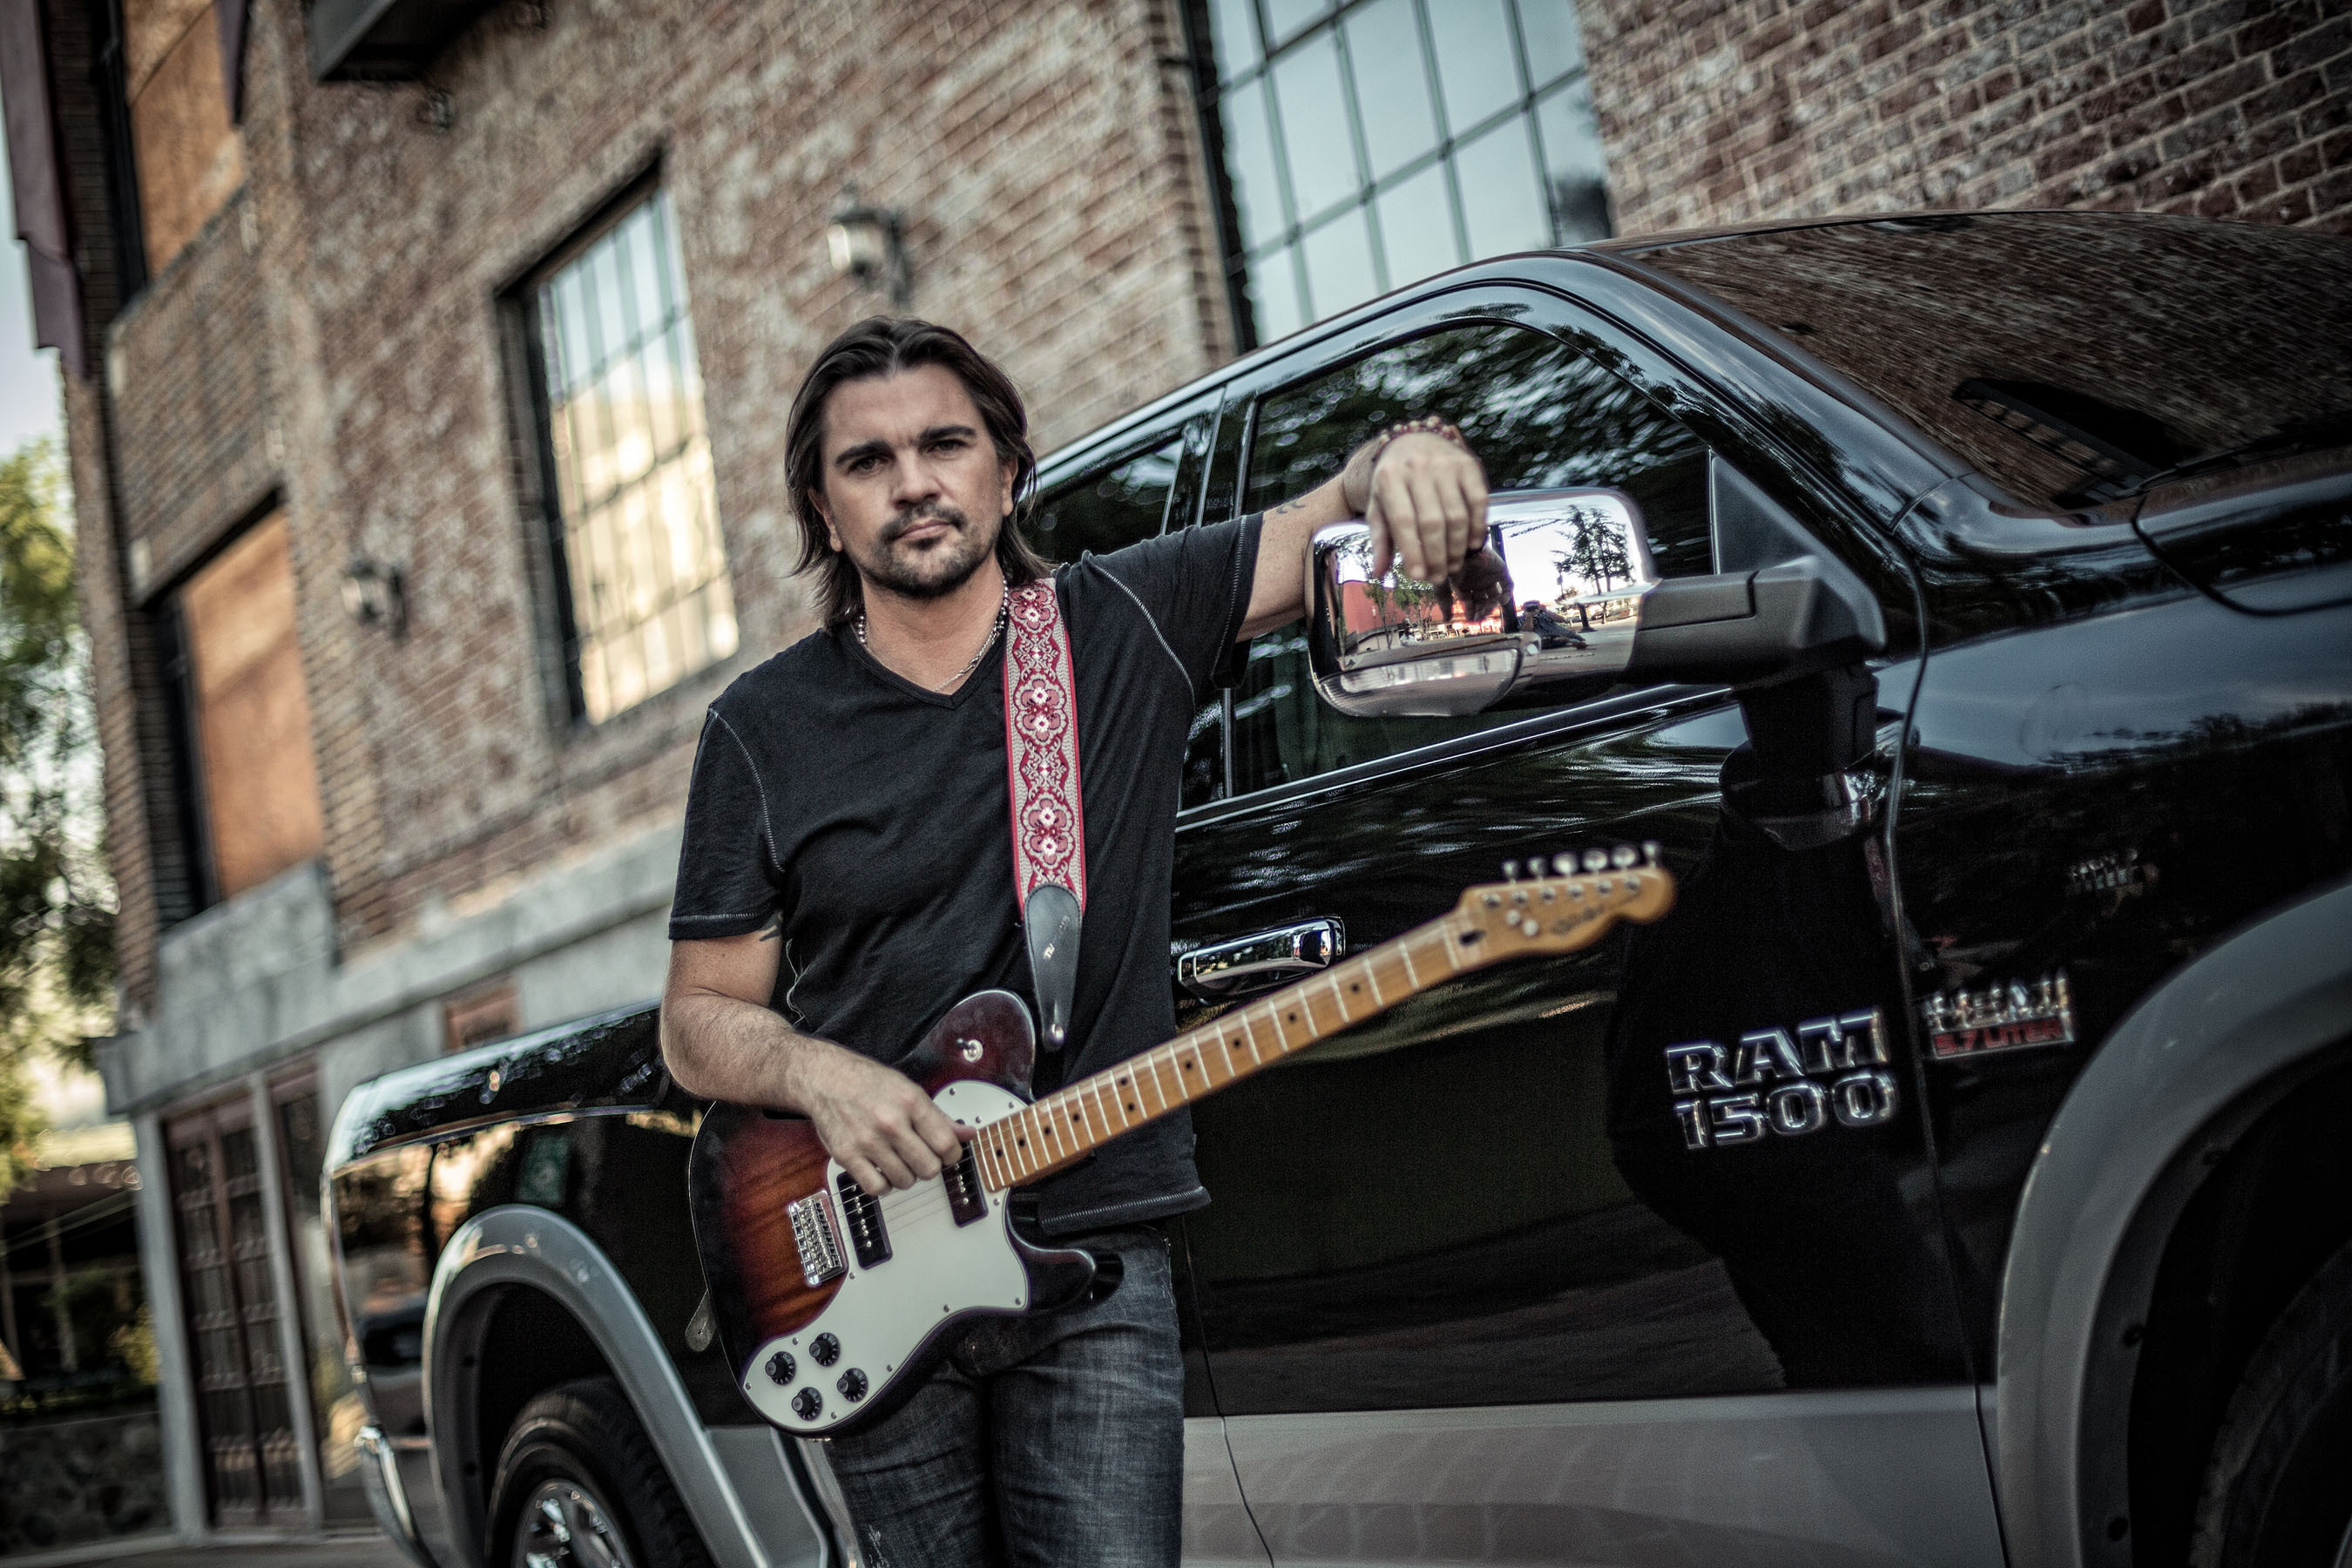 The Ram Truck brand continues partnership with Latin music superstar Juanes in all-new Spanish-language commercials for the 2014 Ram 1500. The campaign focuses on the class-leading innovations of the 2014 Ram 1500, emphasizing values such as hard work and determination shared by the brand and Latin cultures. (PRNewsFoto/Chrysler Group LLC) (PRNewsFoto/CHRYSLER GROUP LLC)